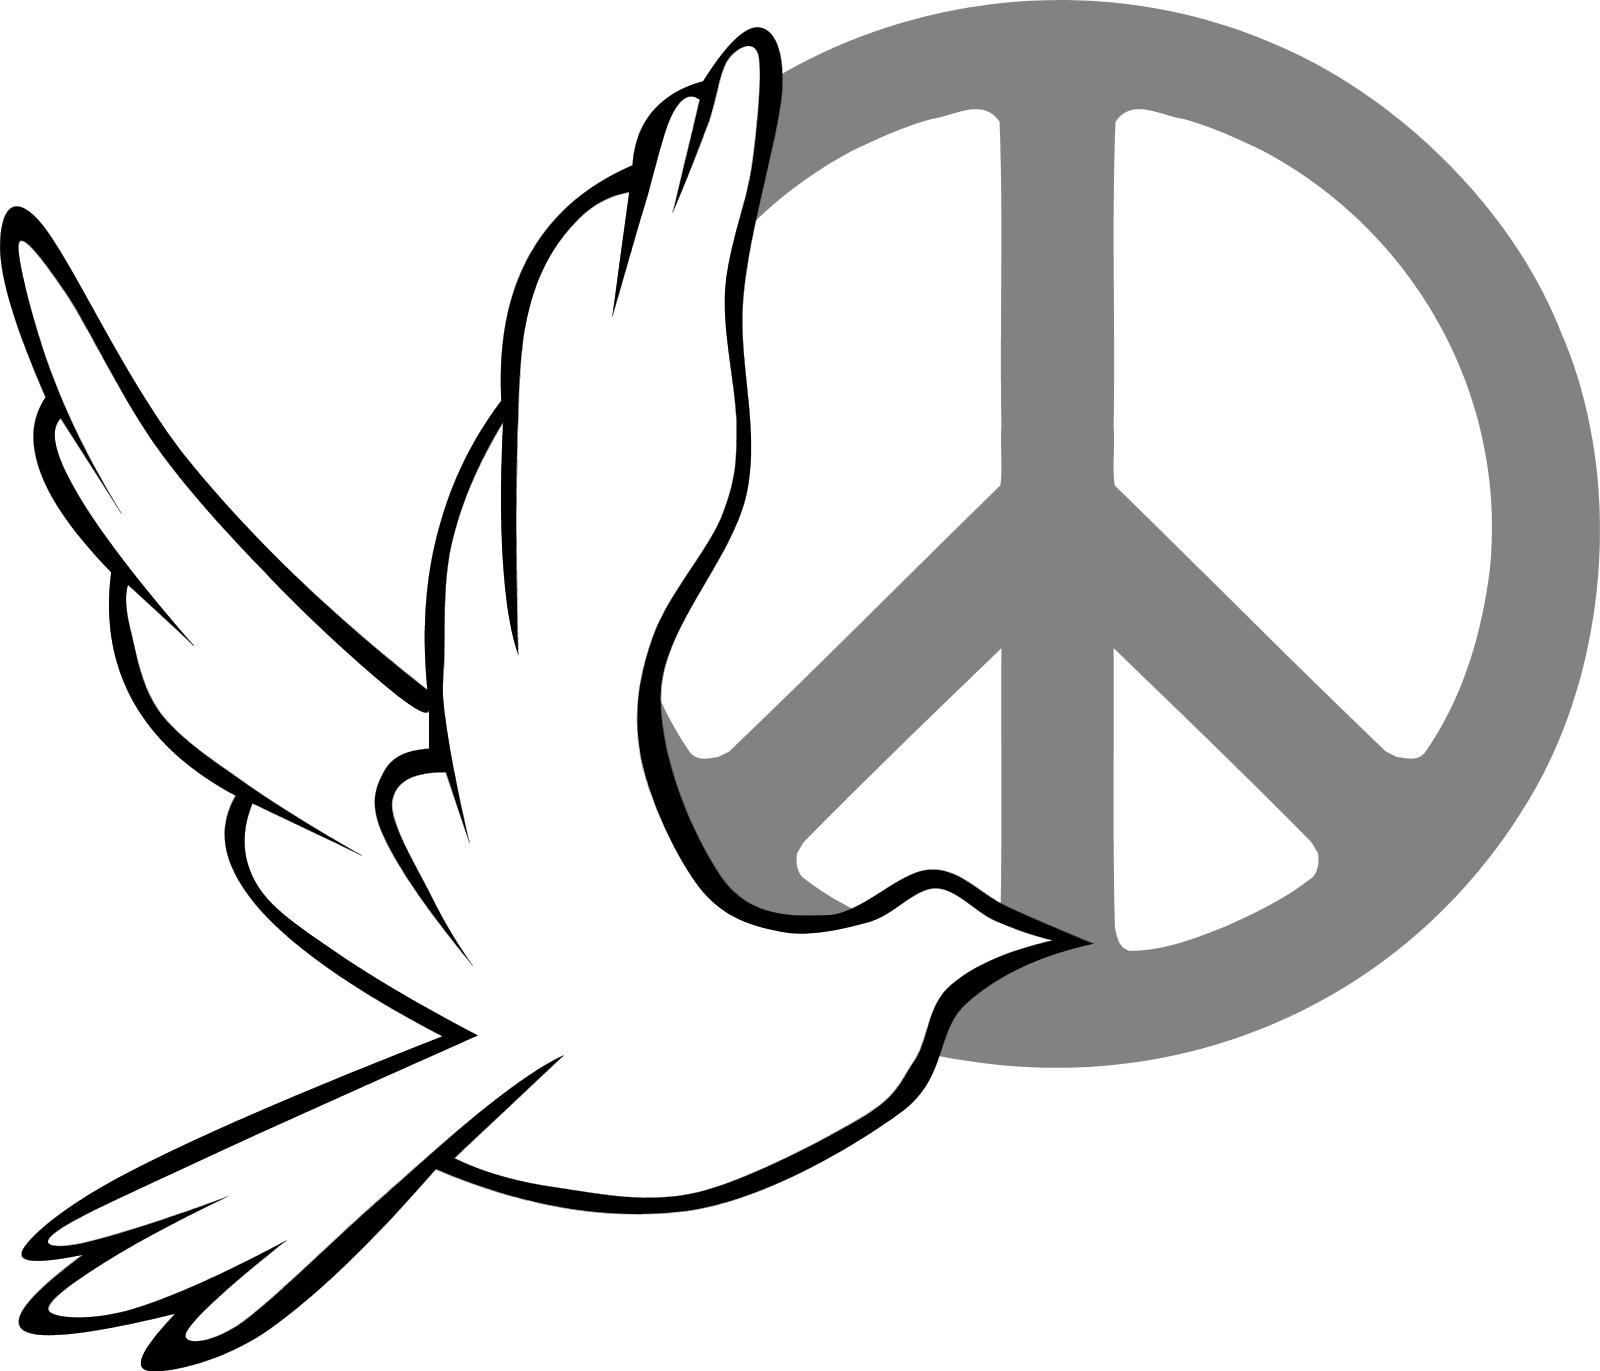 peace-dove-and-sign | A Western Buddhist's Travels